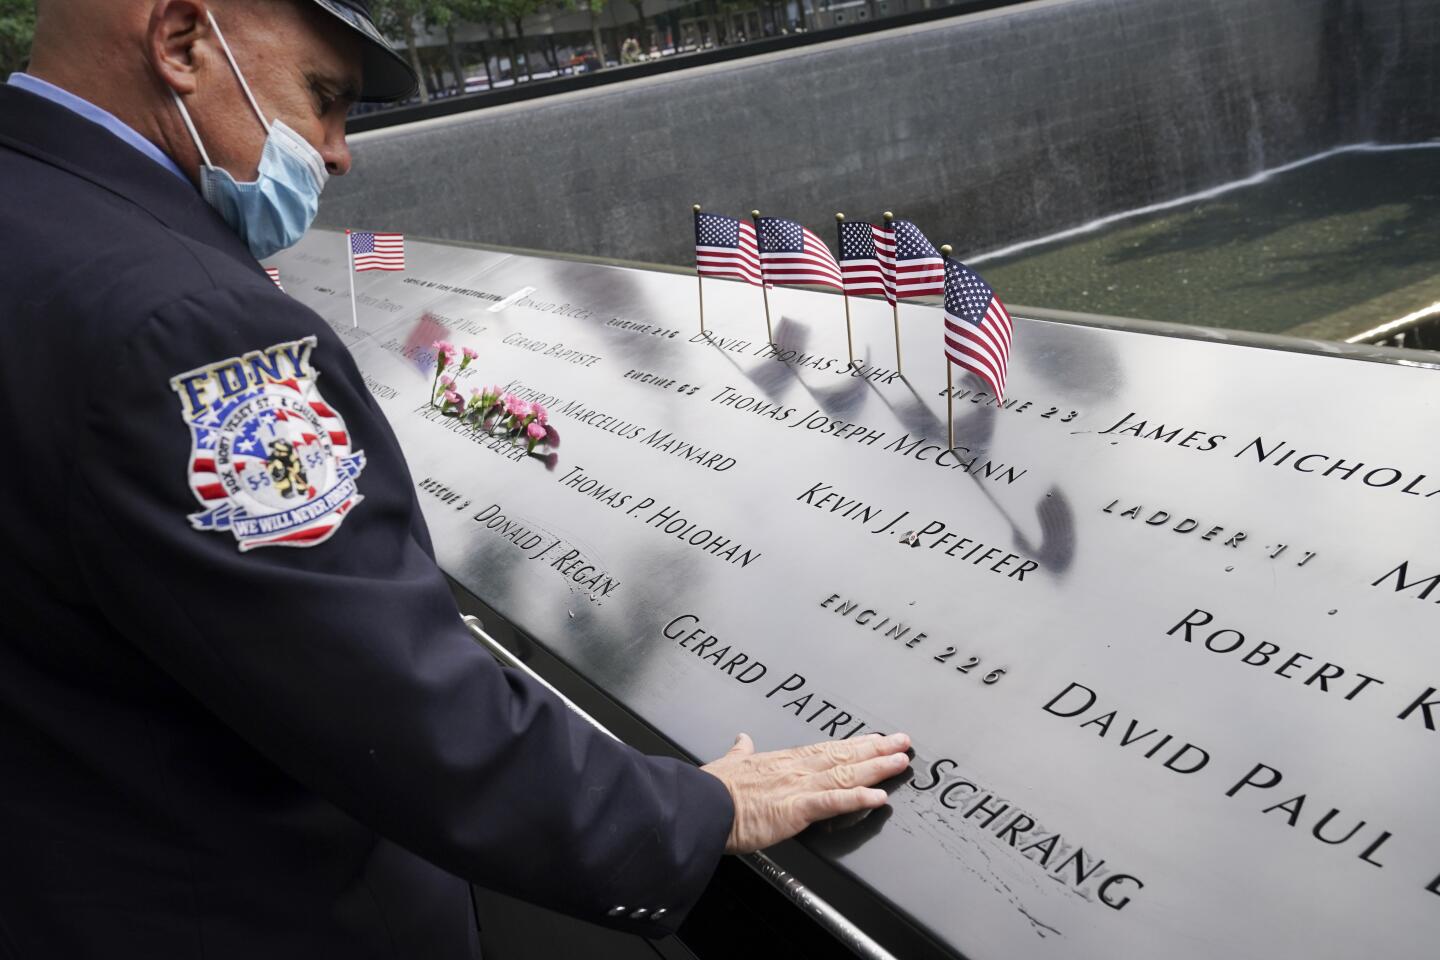 A New York Fire Department member brushes his fingers over the name of a victim at the National September 11 Memorial